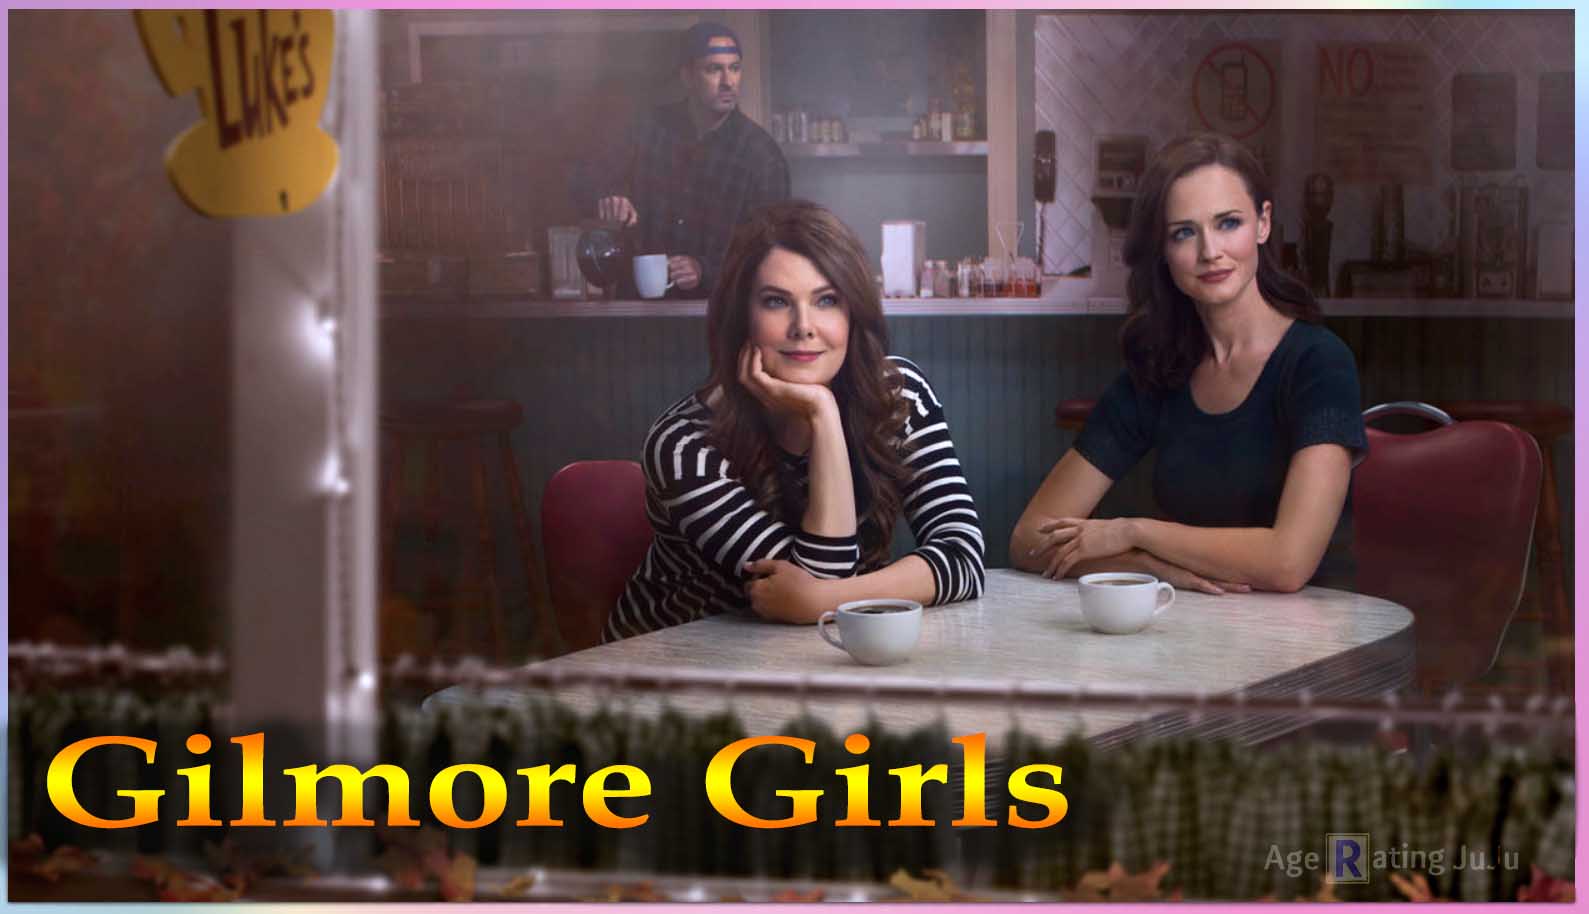 Gilmore Girls Age Rating 2018 - TV Show Poster Images and Wallpapers